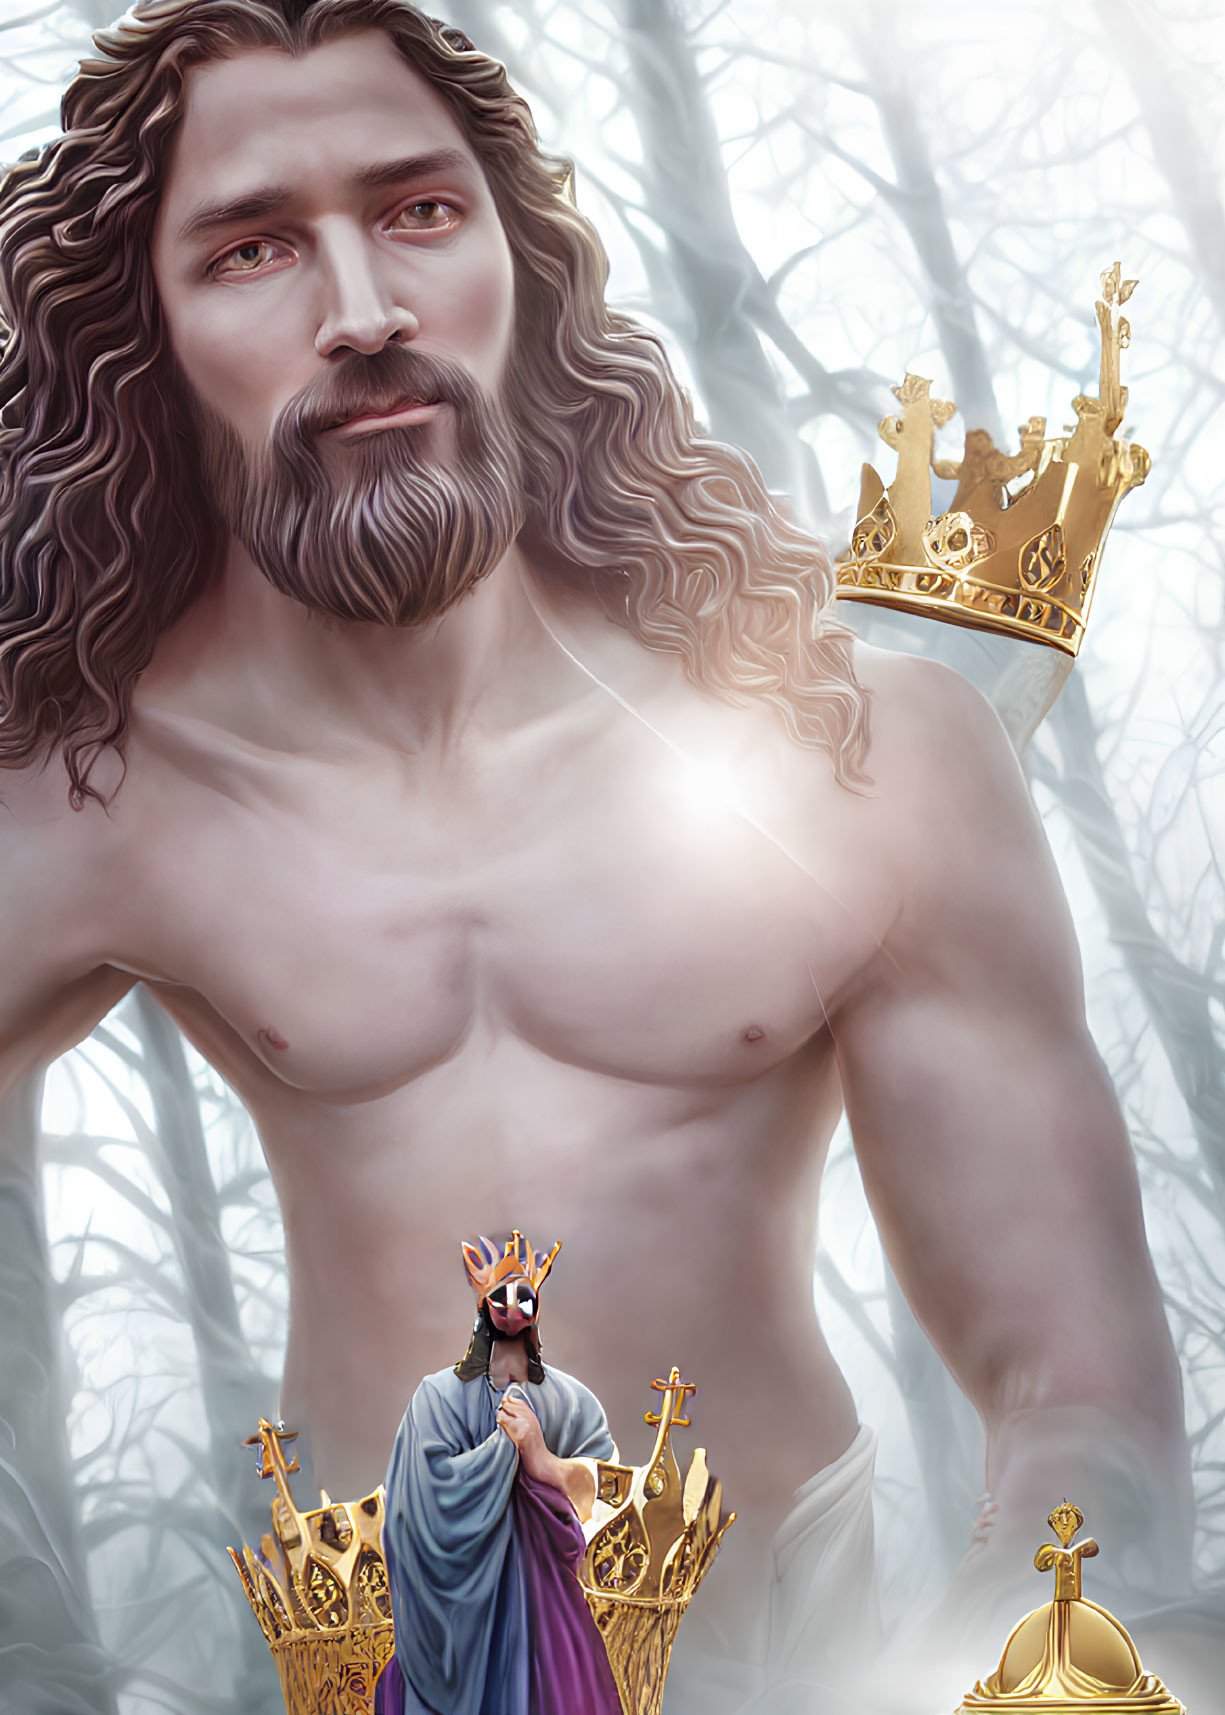 Digital artwork of giant man with crown and robed figure in misty forest